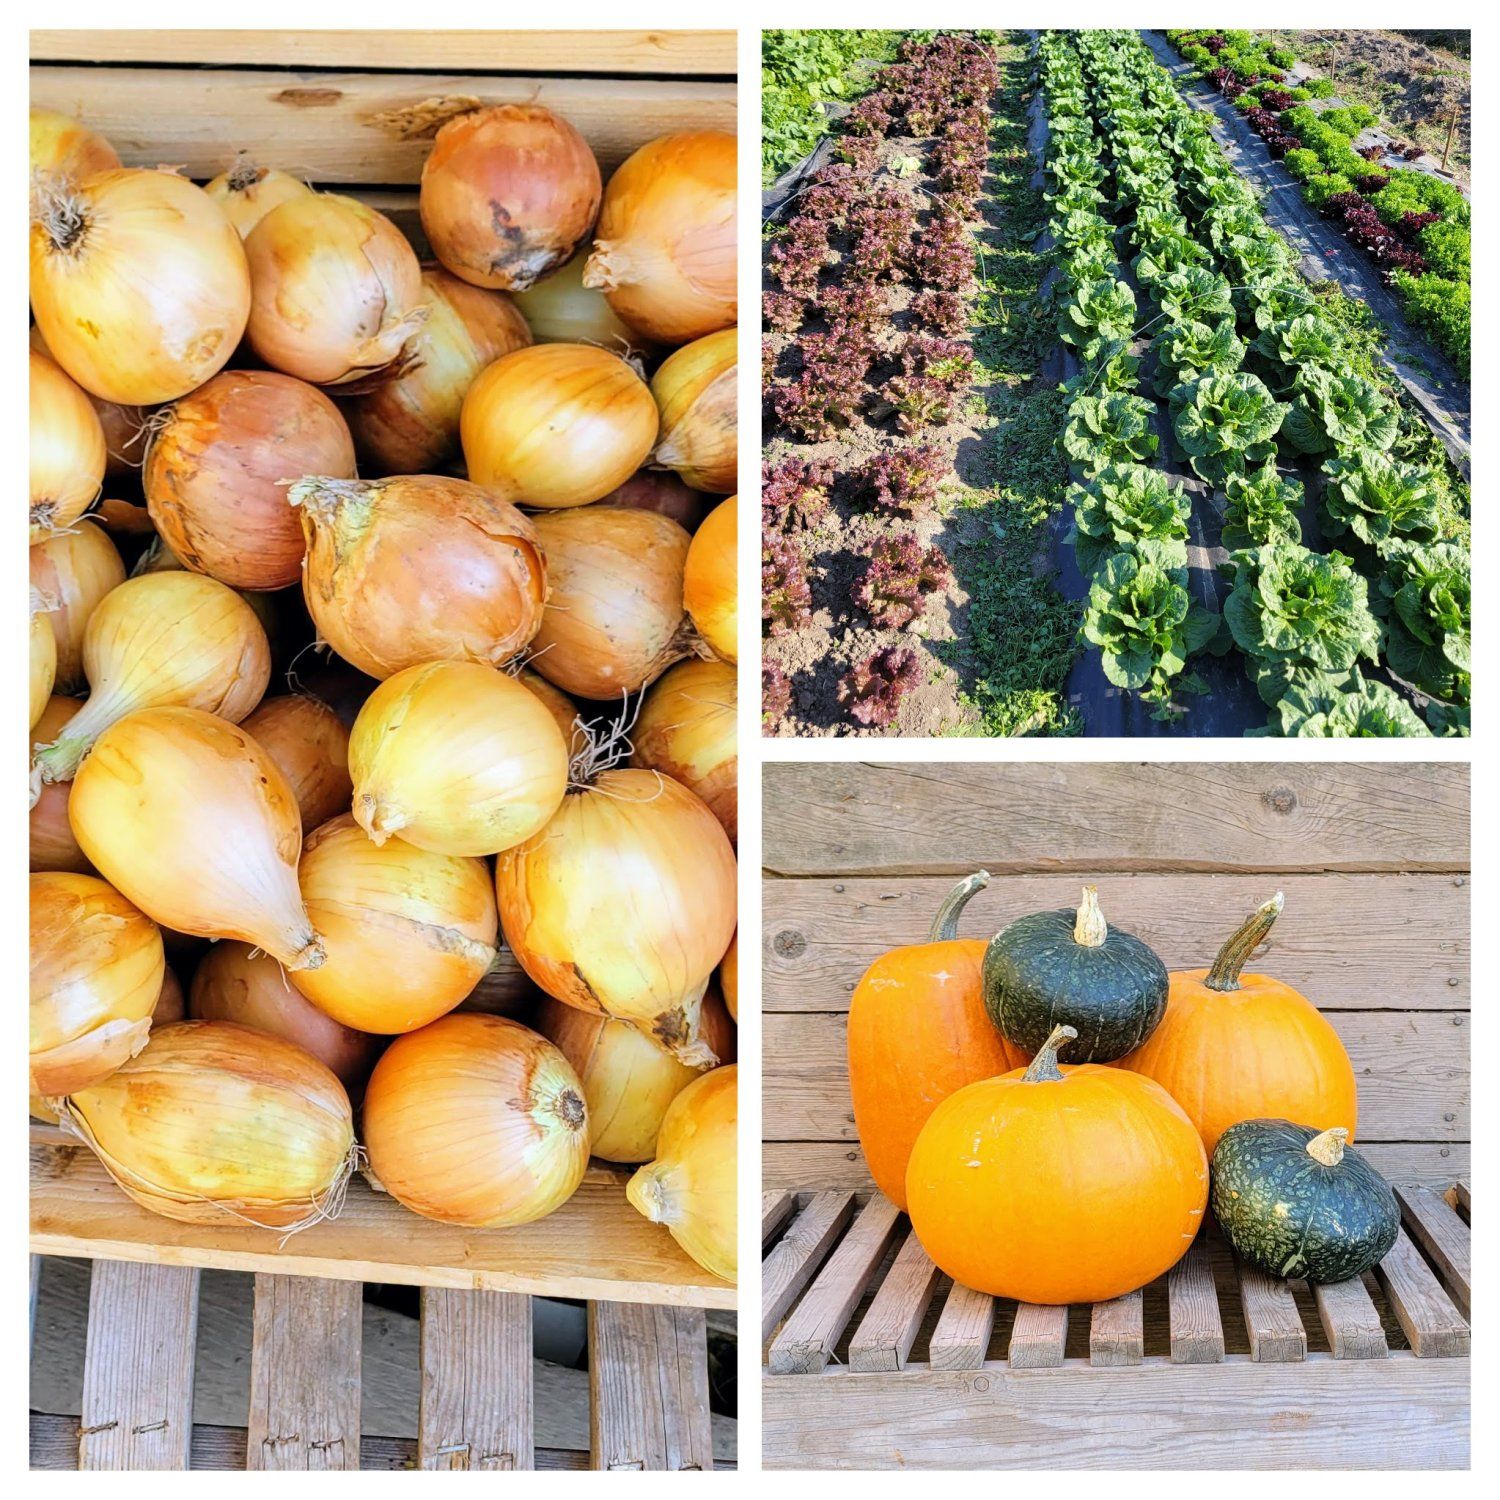 Farm Stand for October 12 & 13, 2022